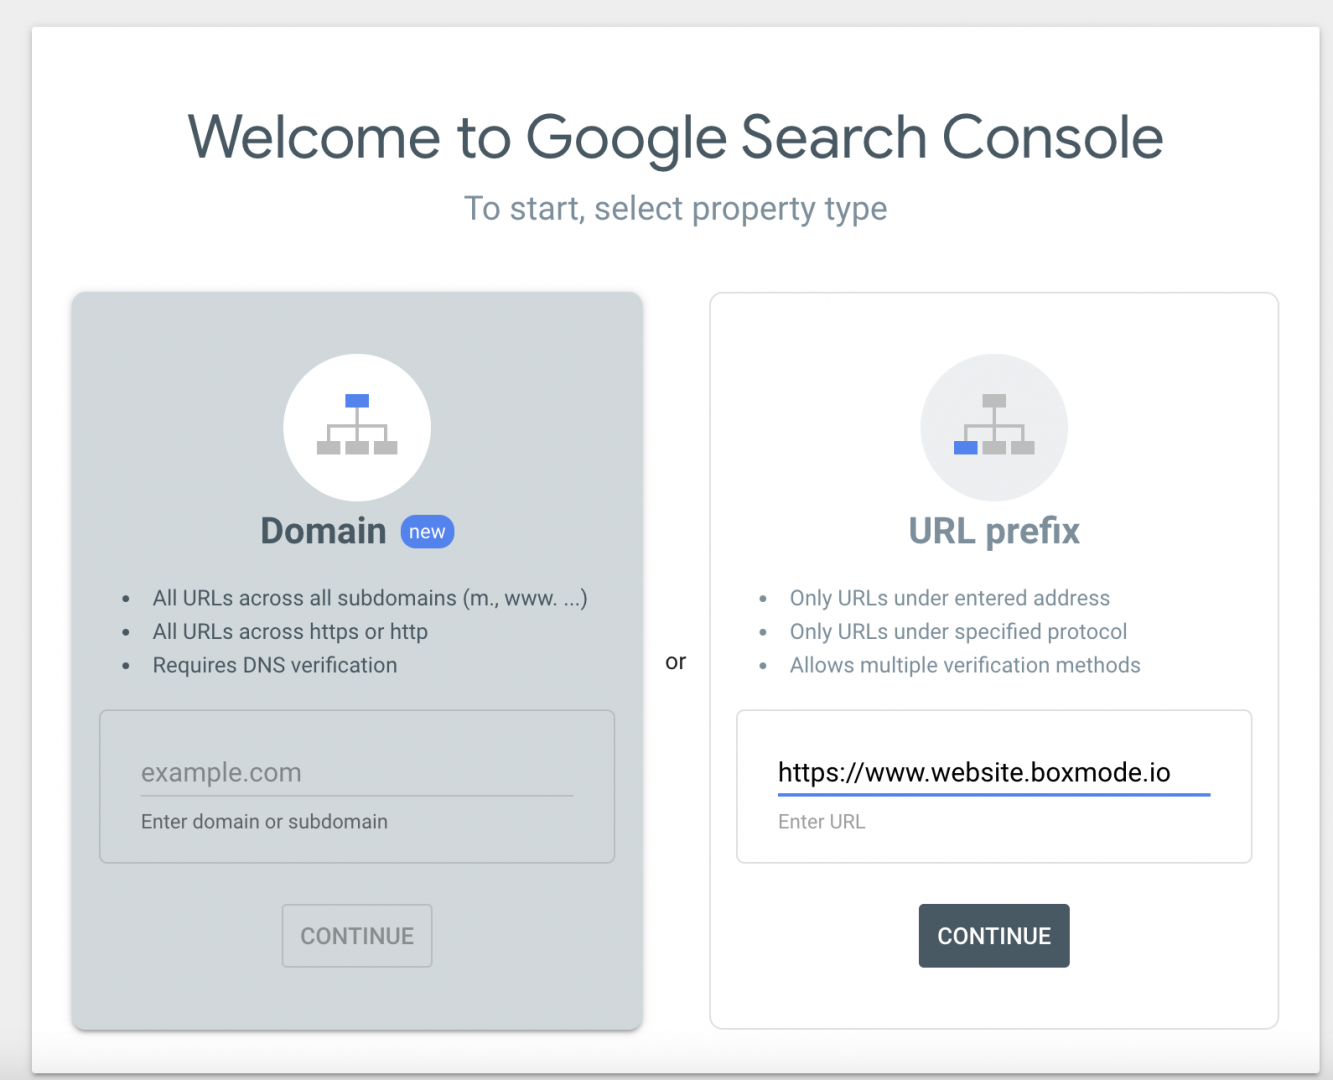 verifying-a-domain-in-google-search-console-boxmode-help-center